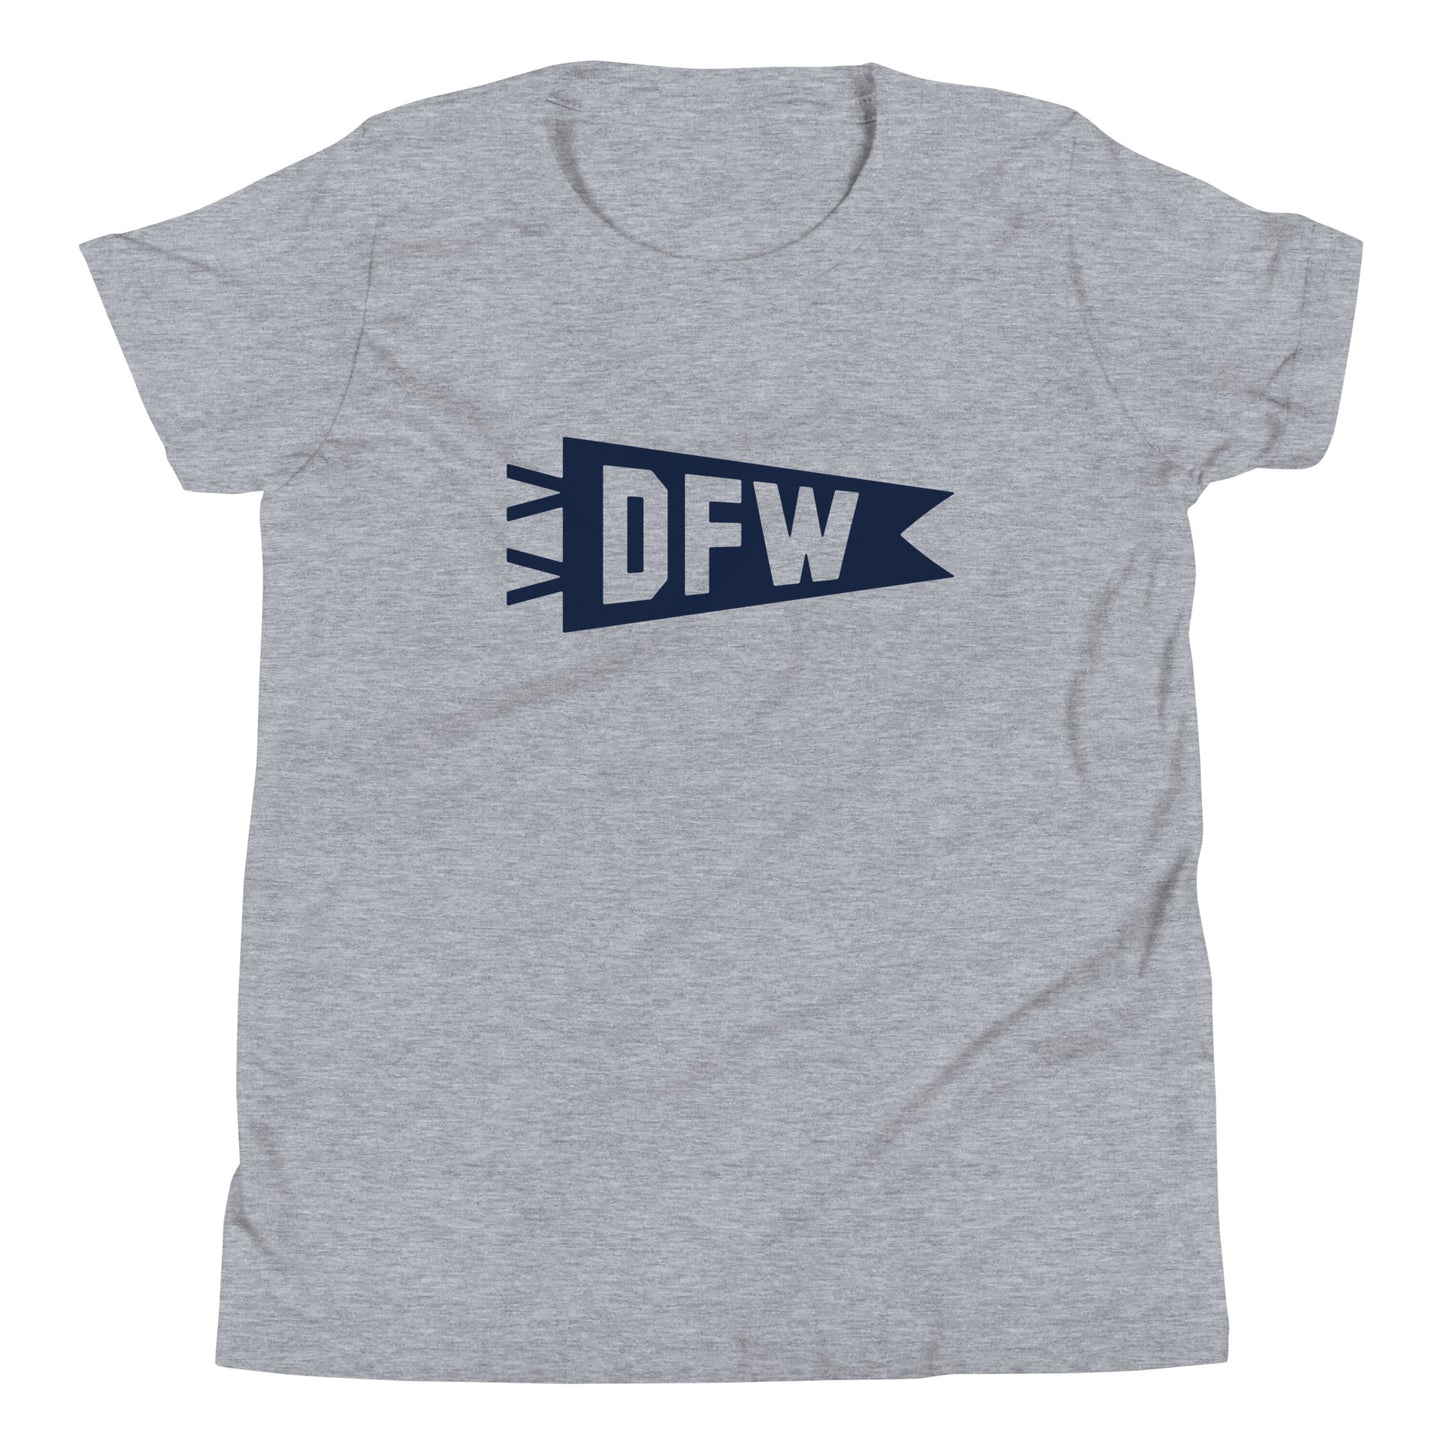 Kid's Airport Code Tee - Navy Blue Graphic • DFW Dallas • YHM Designs - Image 01